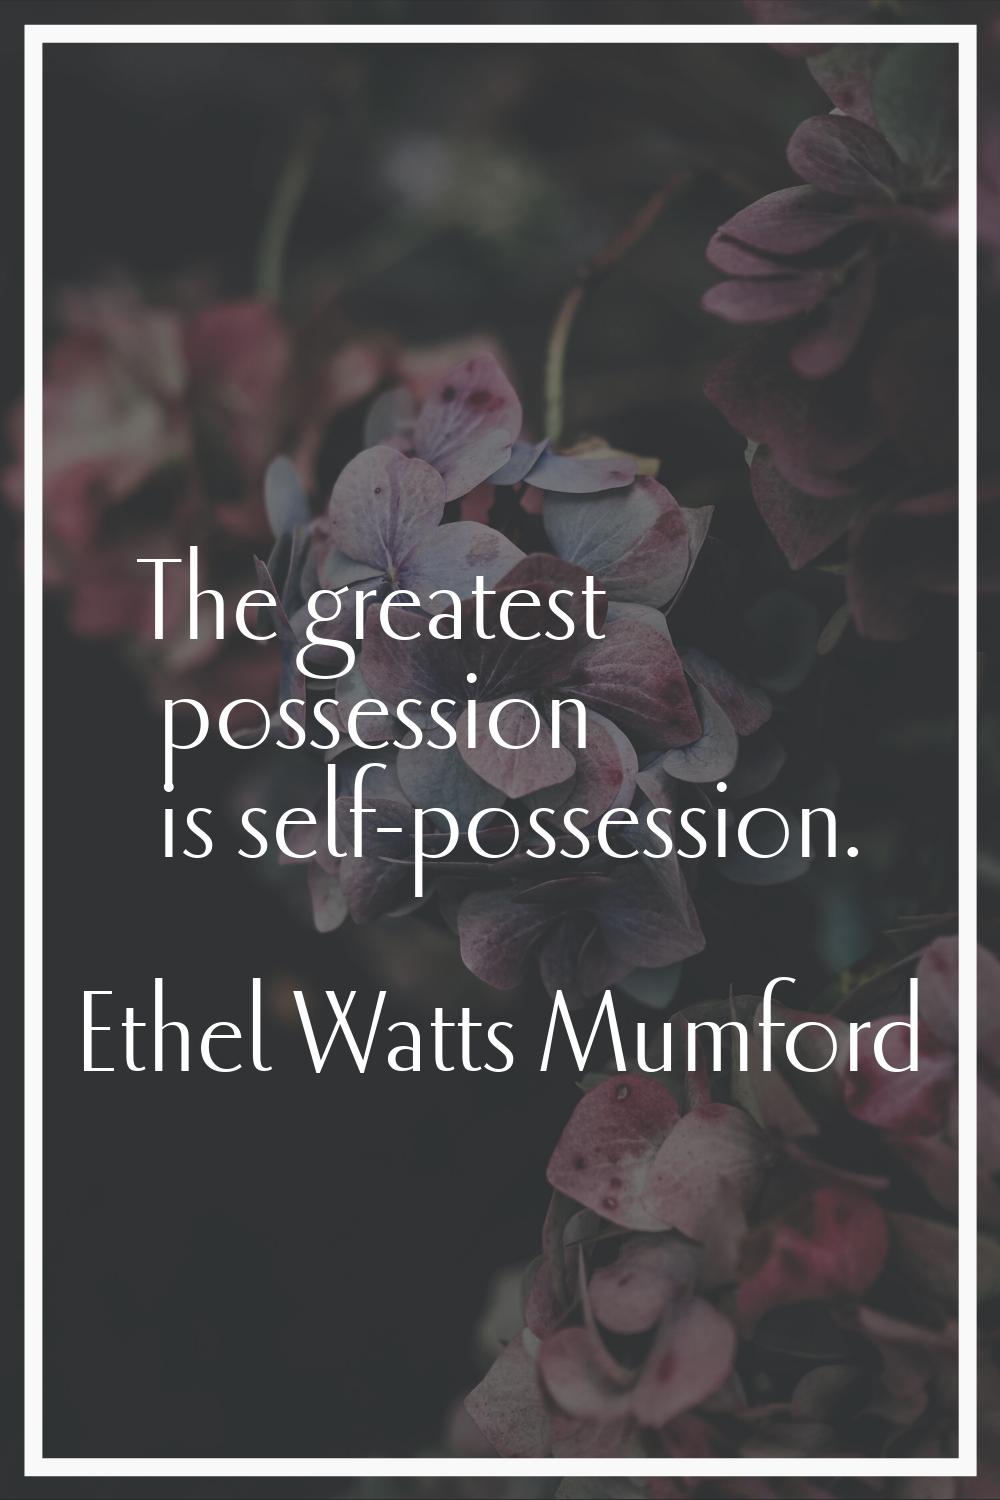 The greatest possession is self-possession.